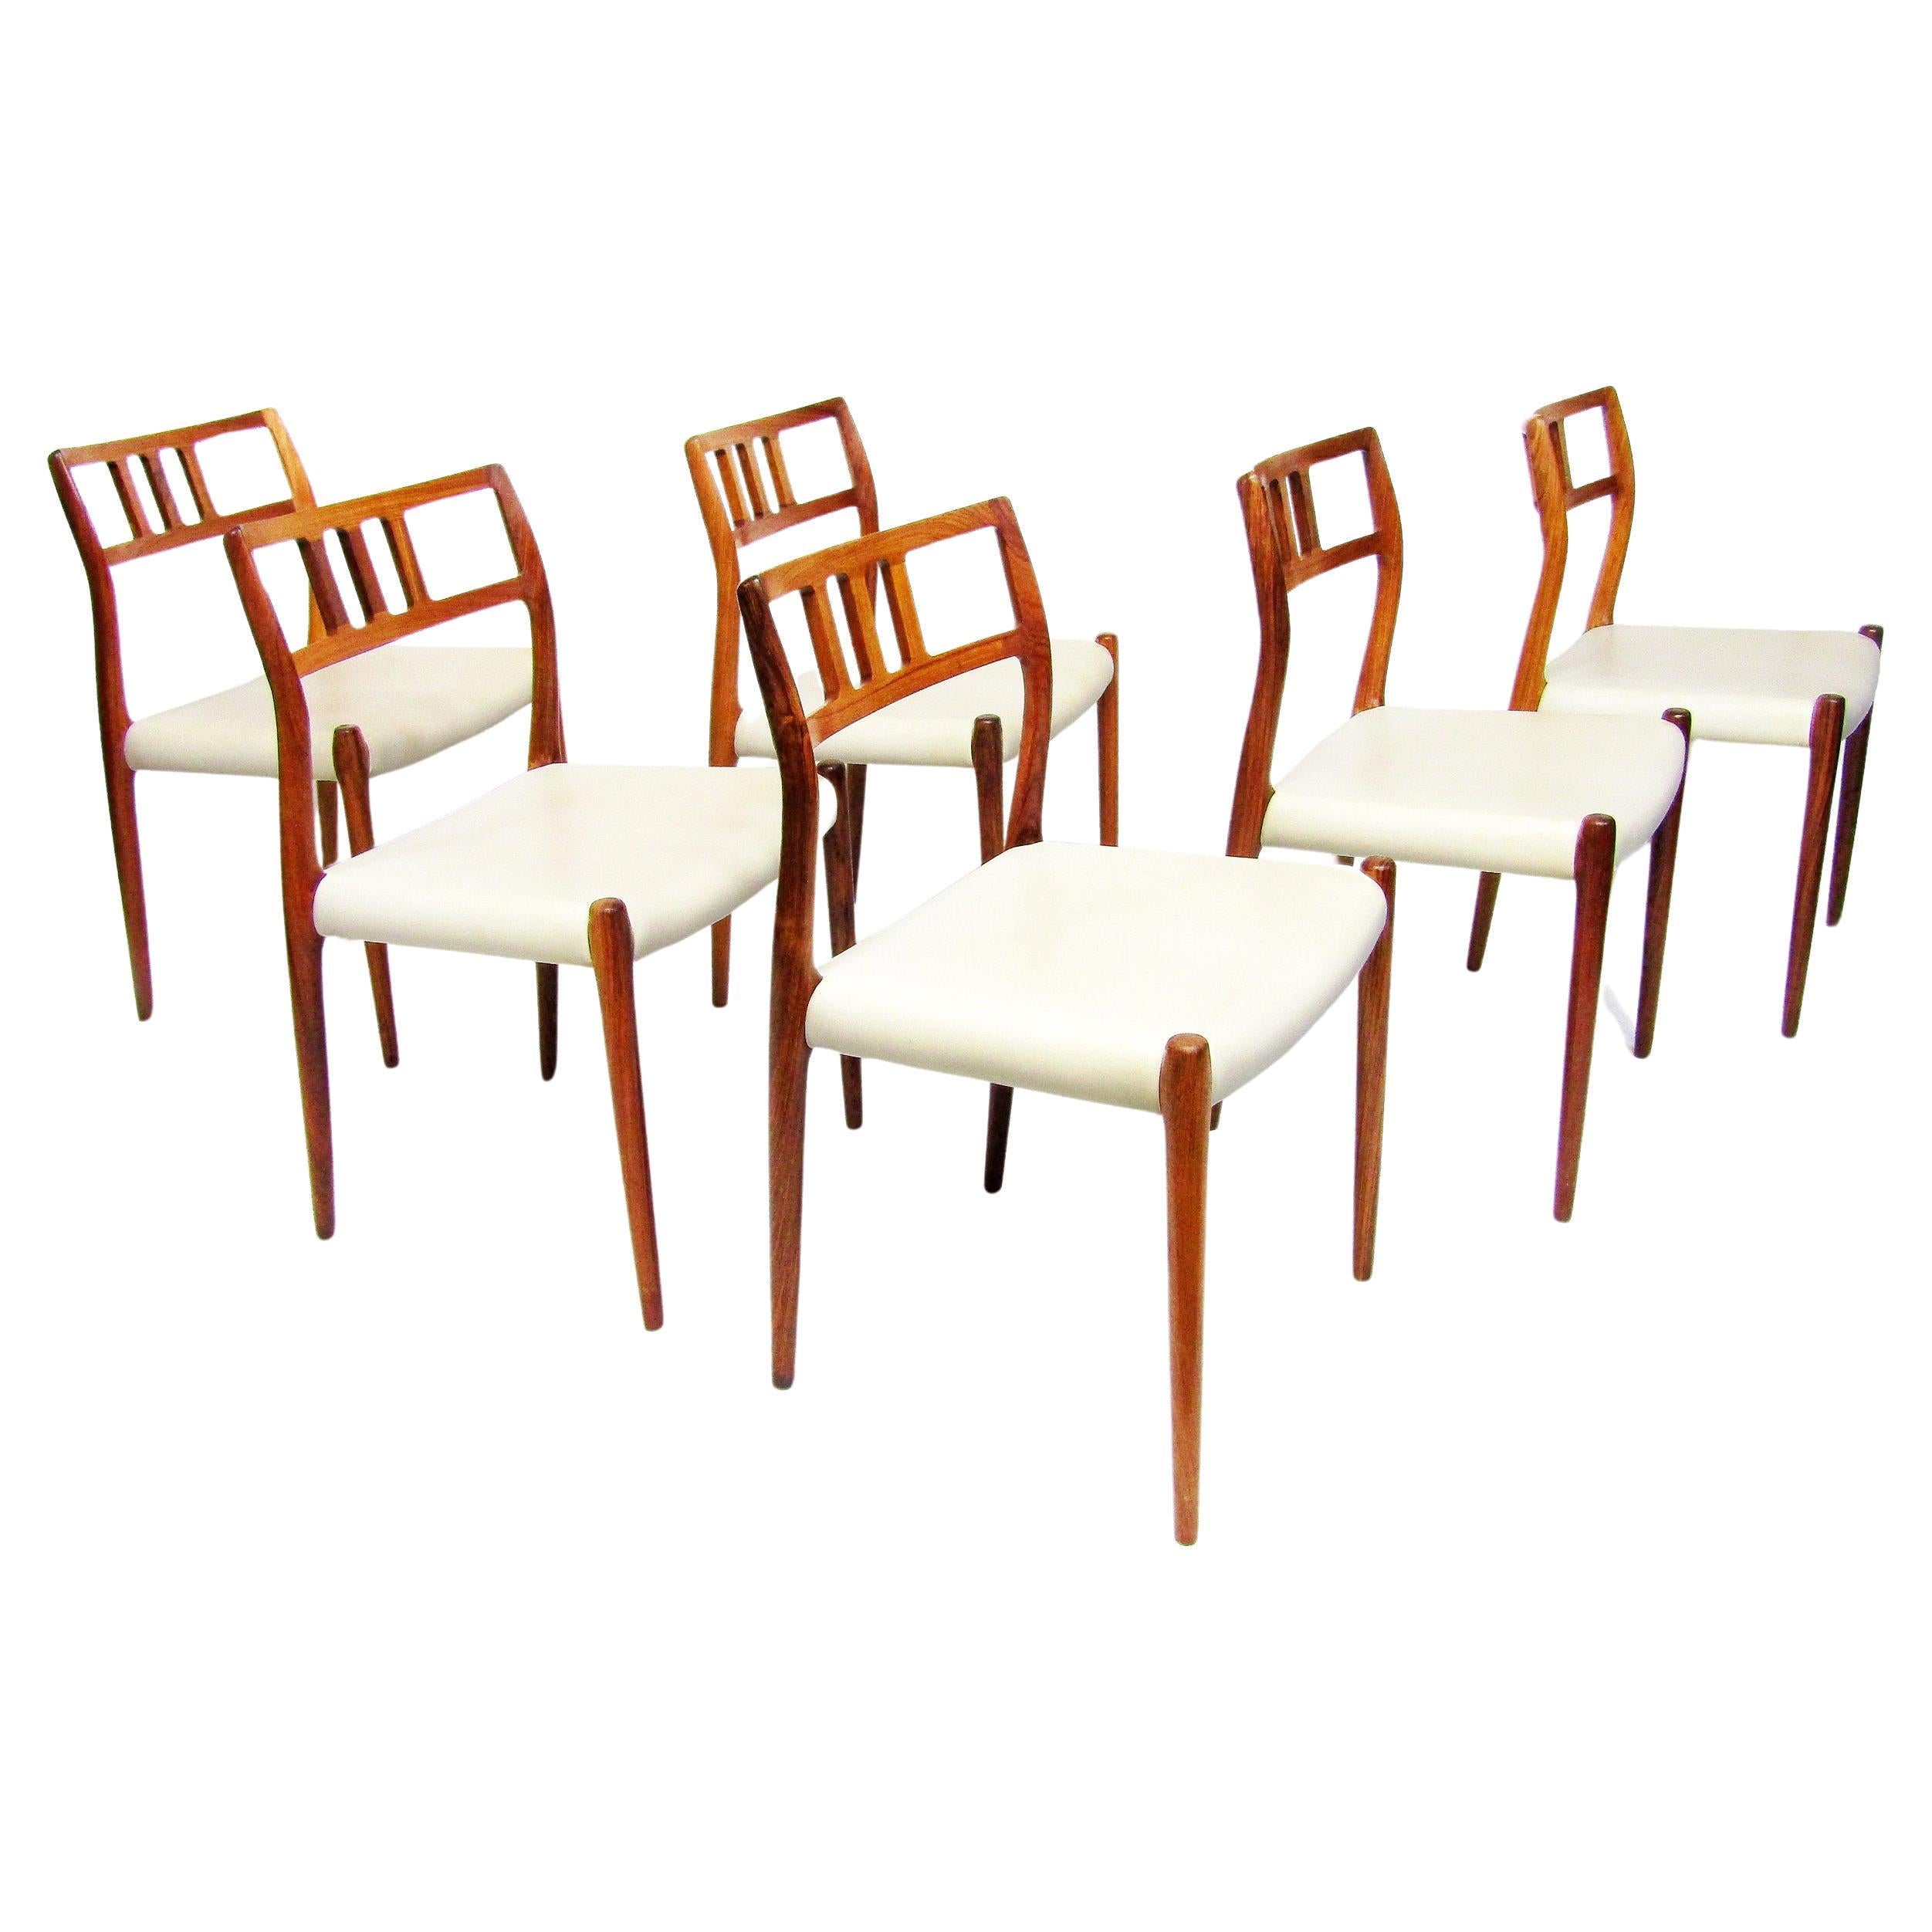 Six Danish "Model 79" Chairs In Rosewood by Niels Moller, c. 1960 For Sale